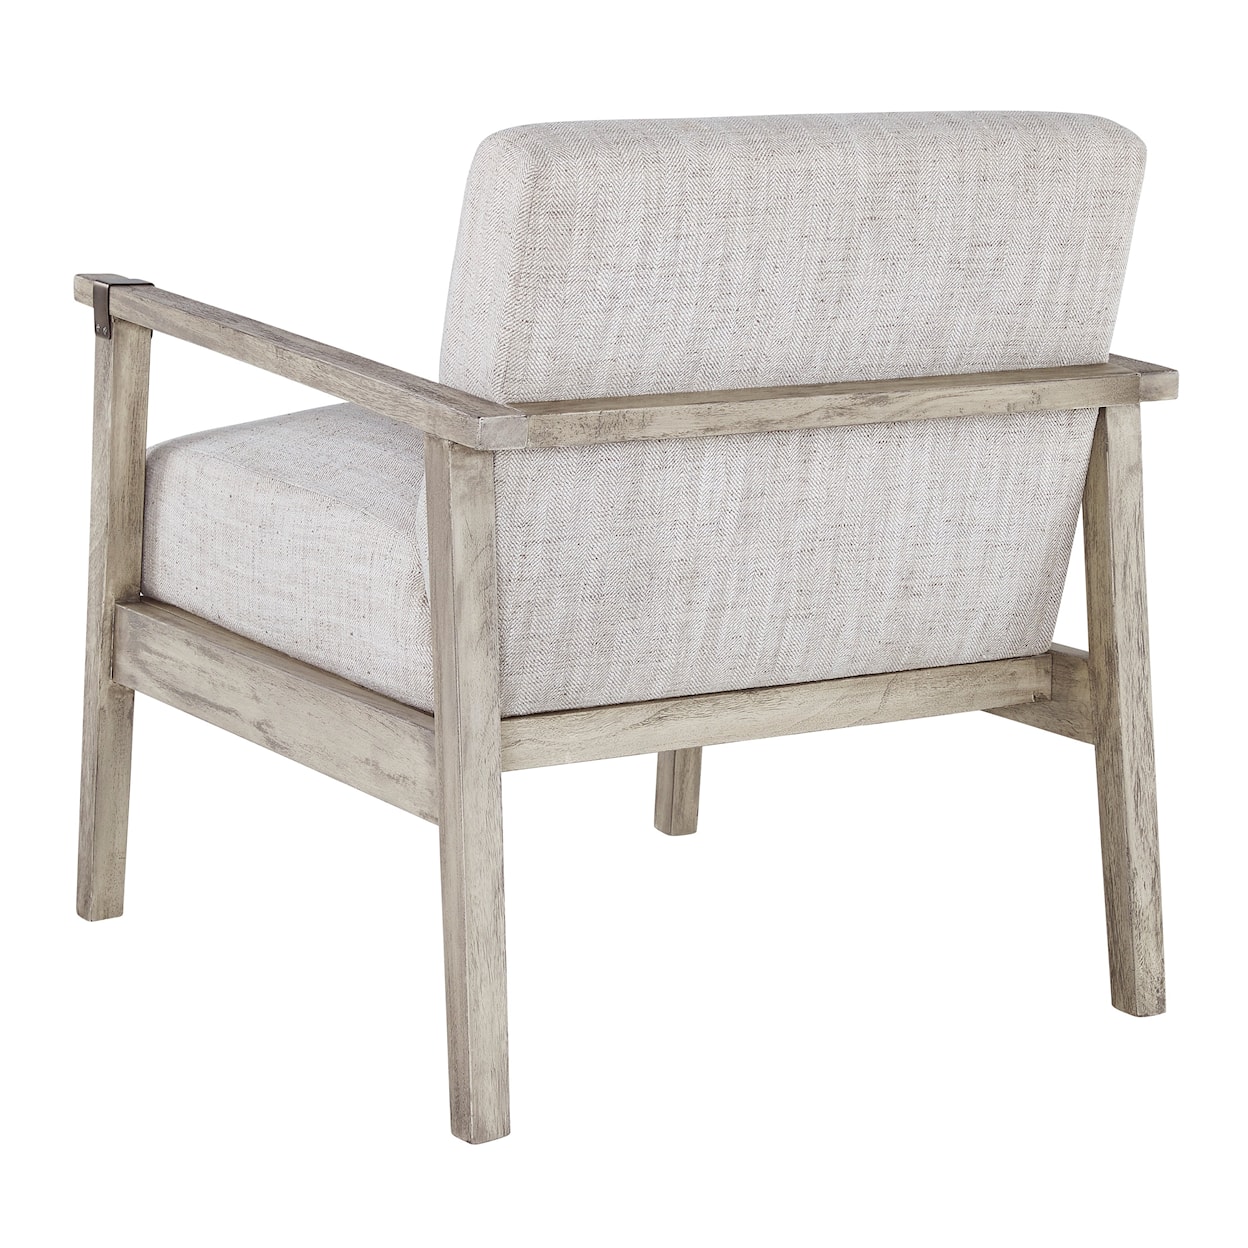 Signature Design by Ashley Furniture Dalenville Accent Chair